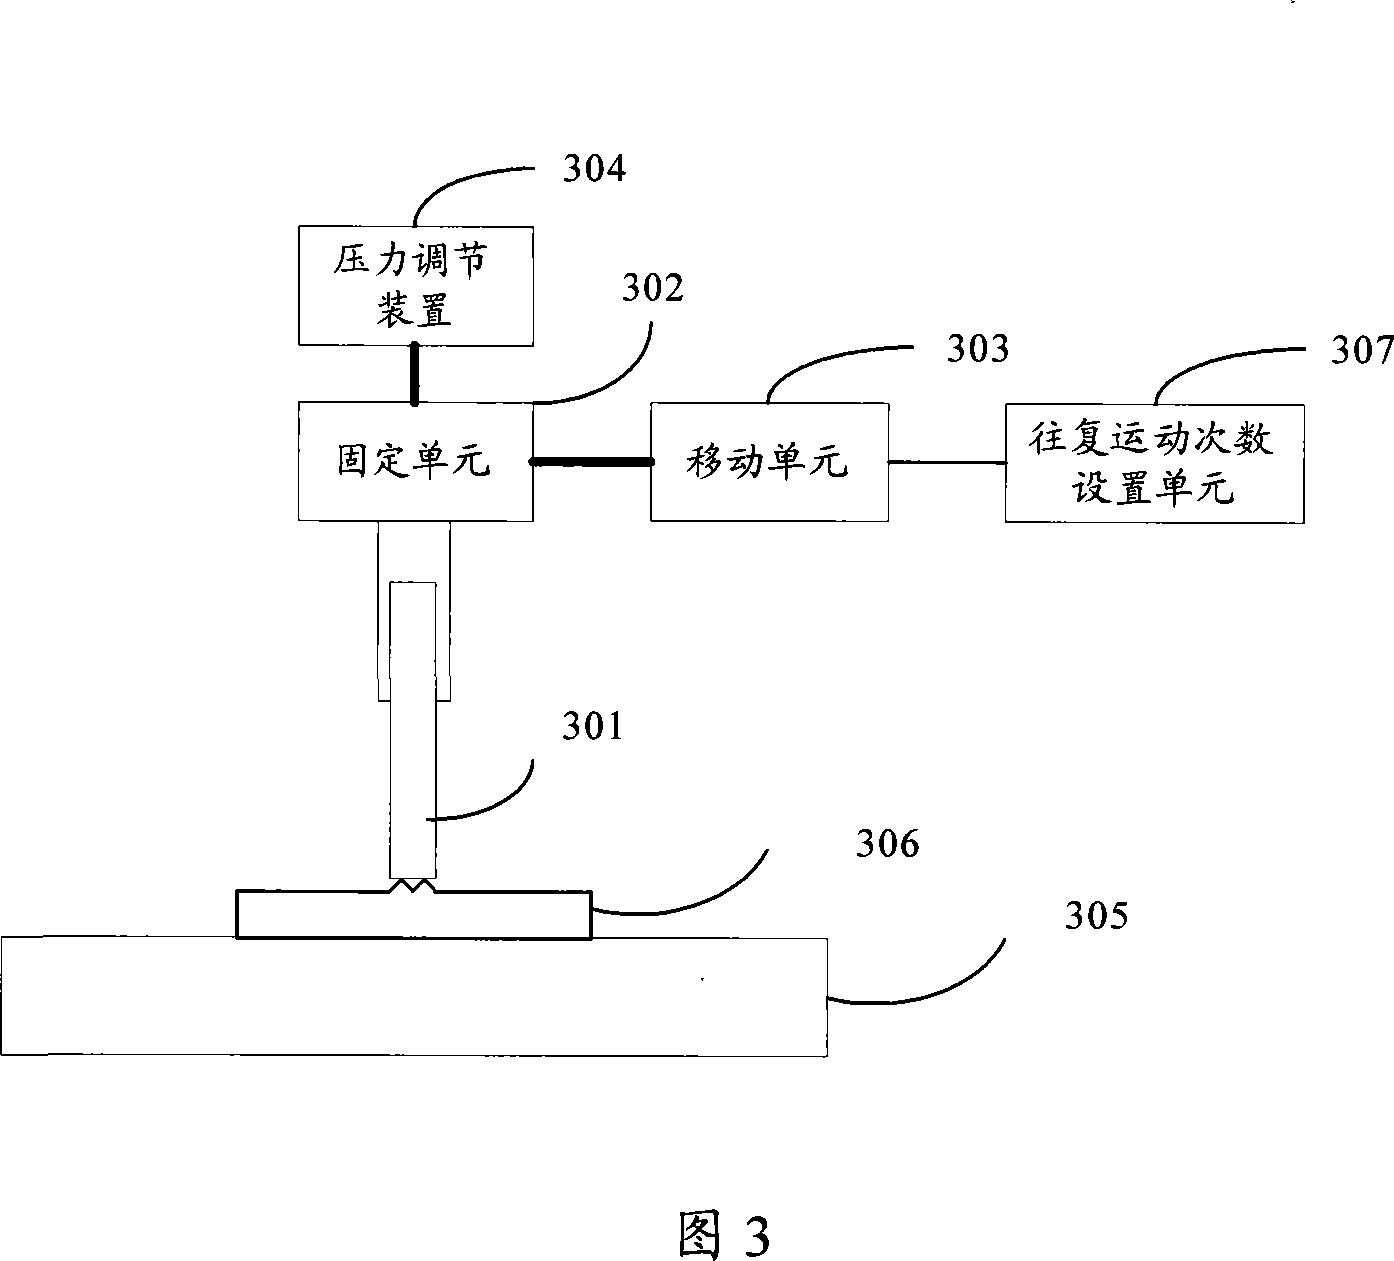 Wearability test method and implementation device